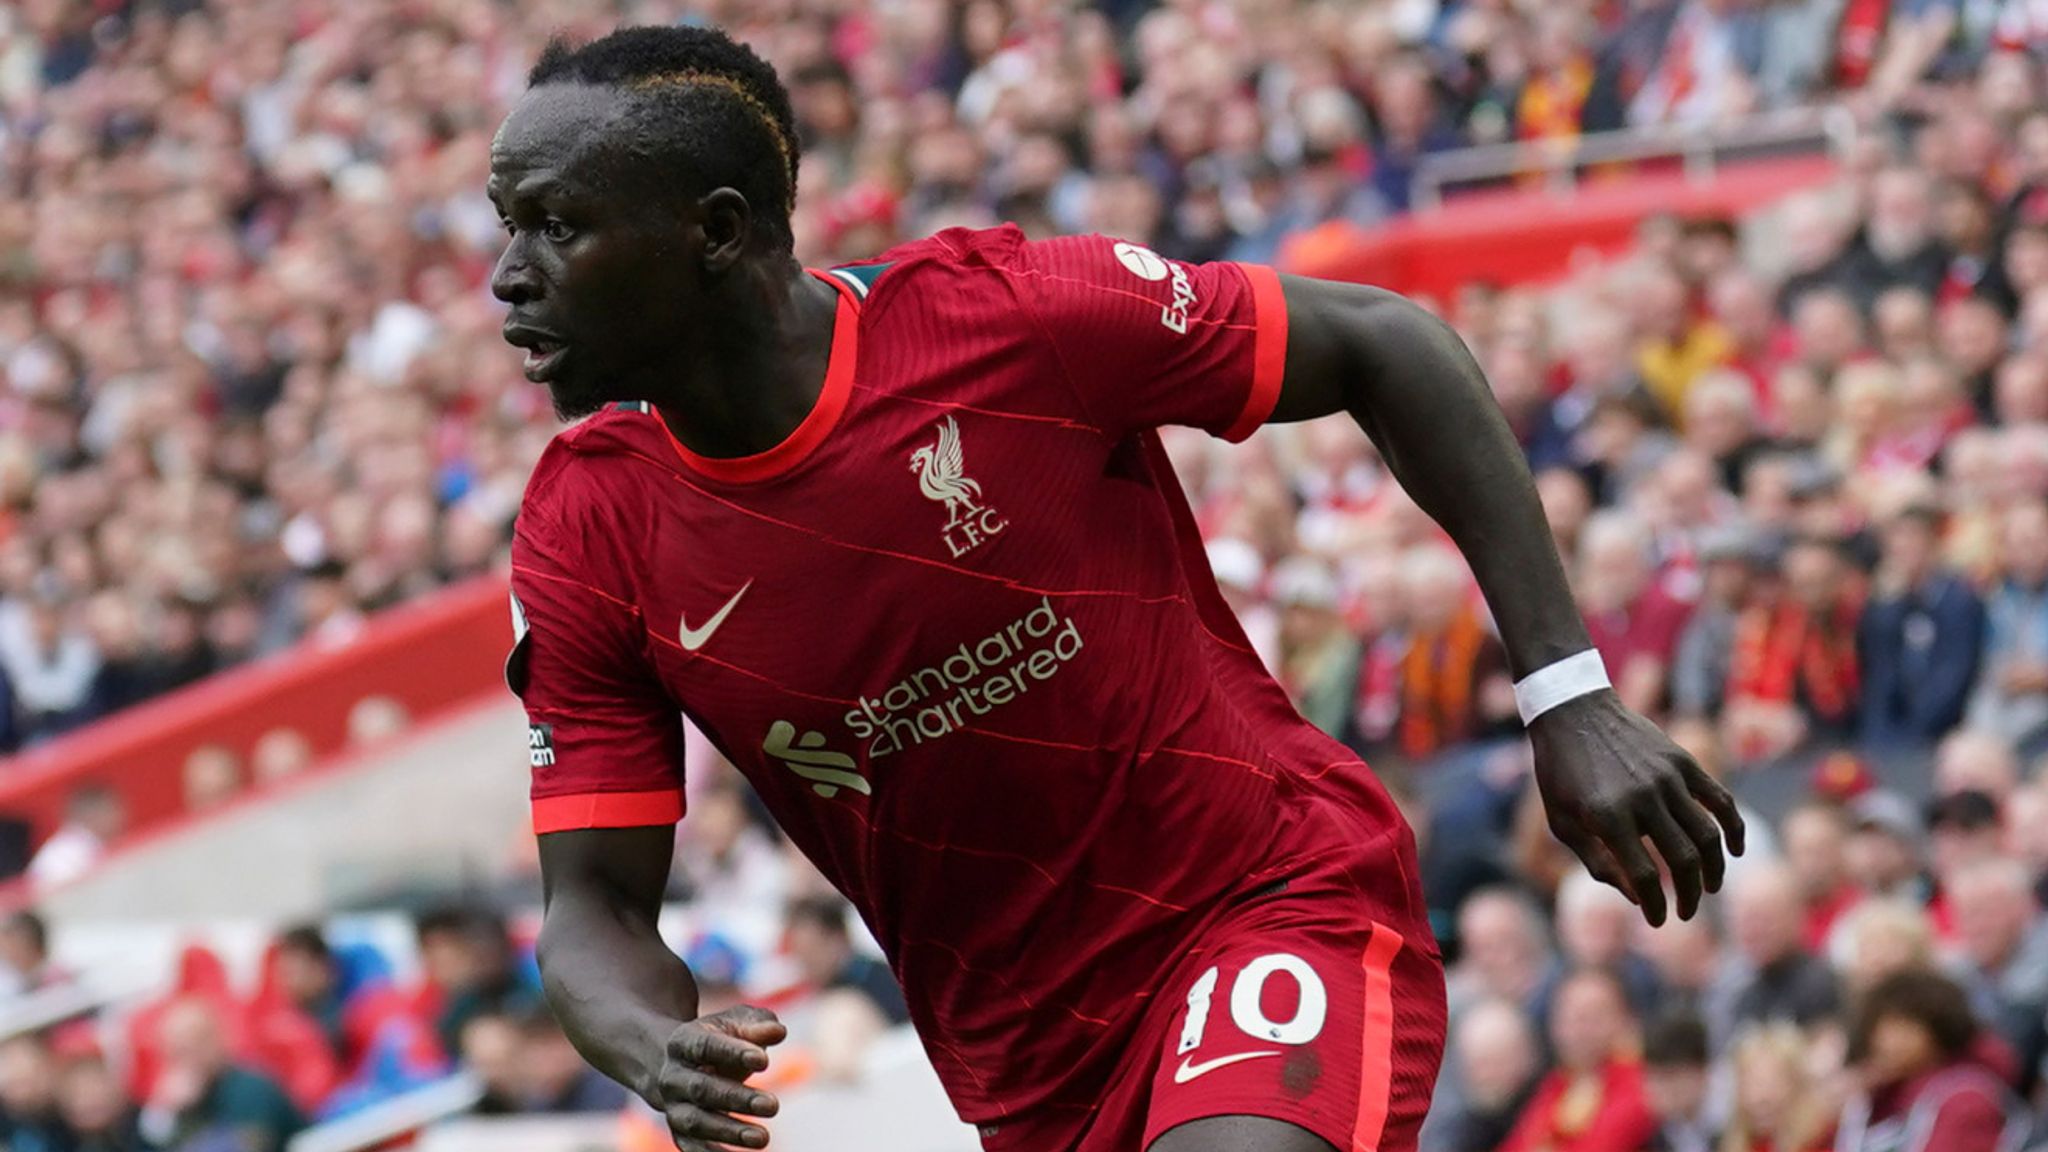 UCL Final – "I'll Decide My Future After Real Madrid Game", Says Mane